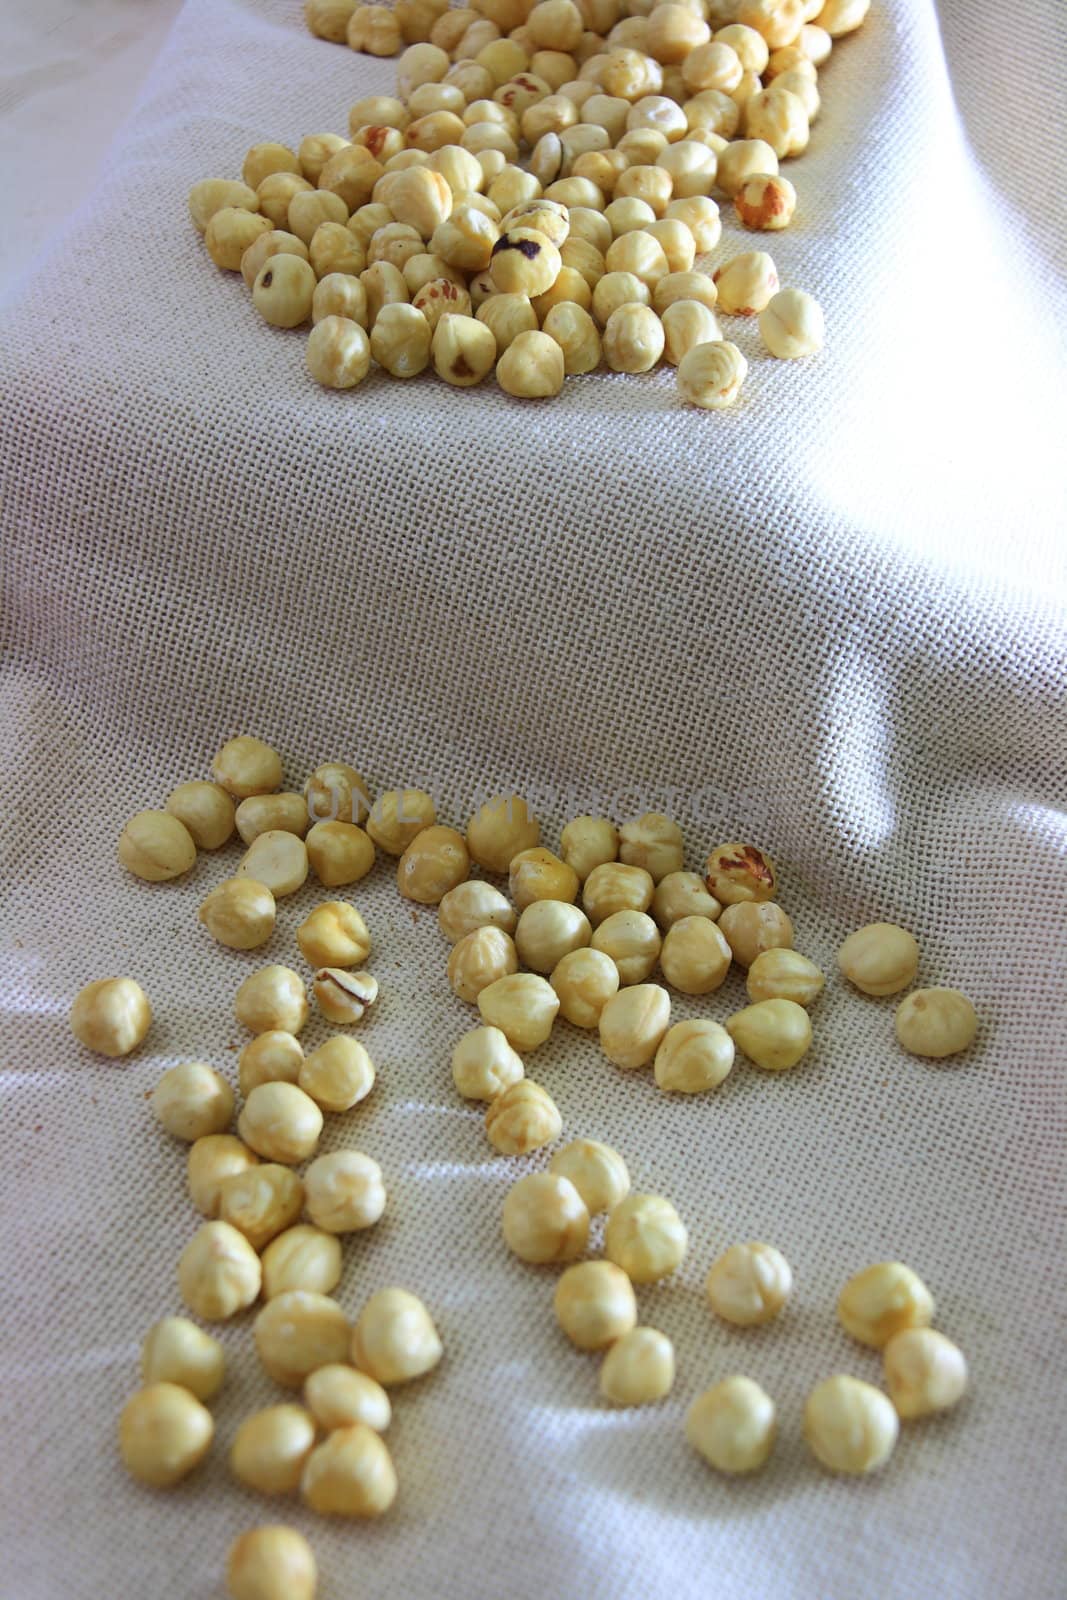 light bown fresh hazelnuts in group on natural cloth 